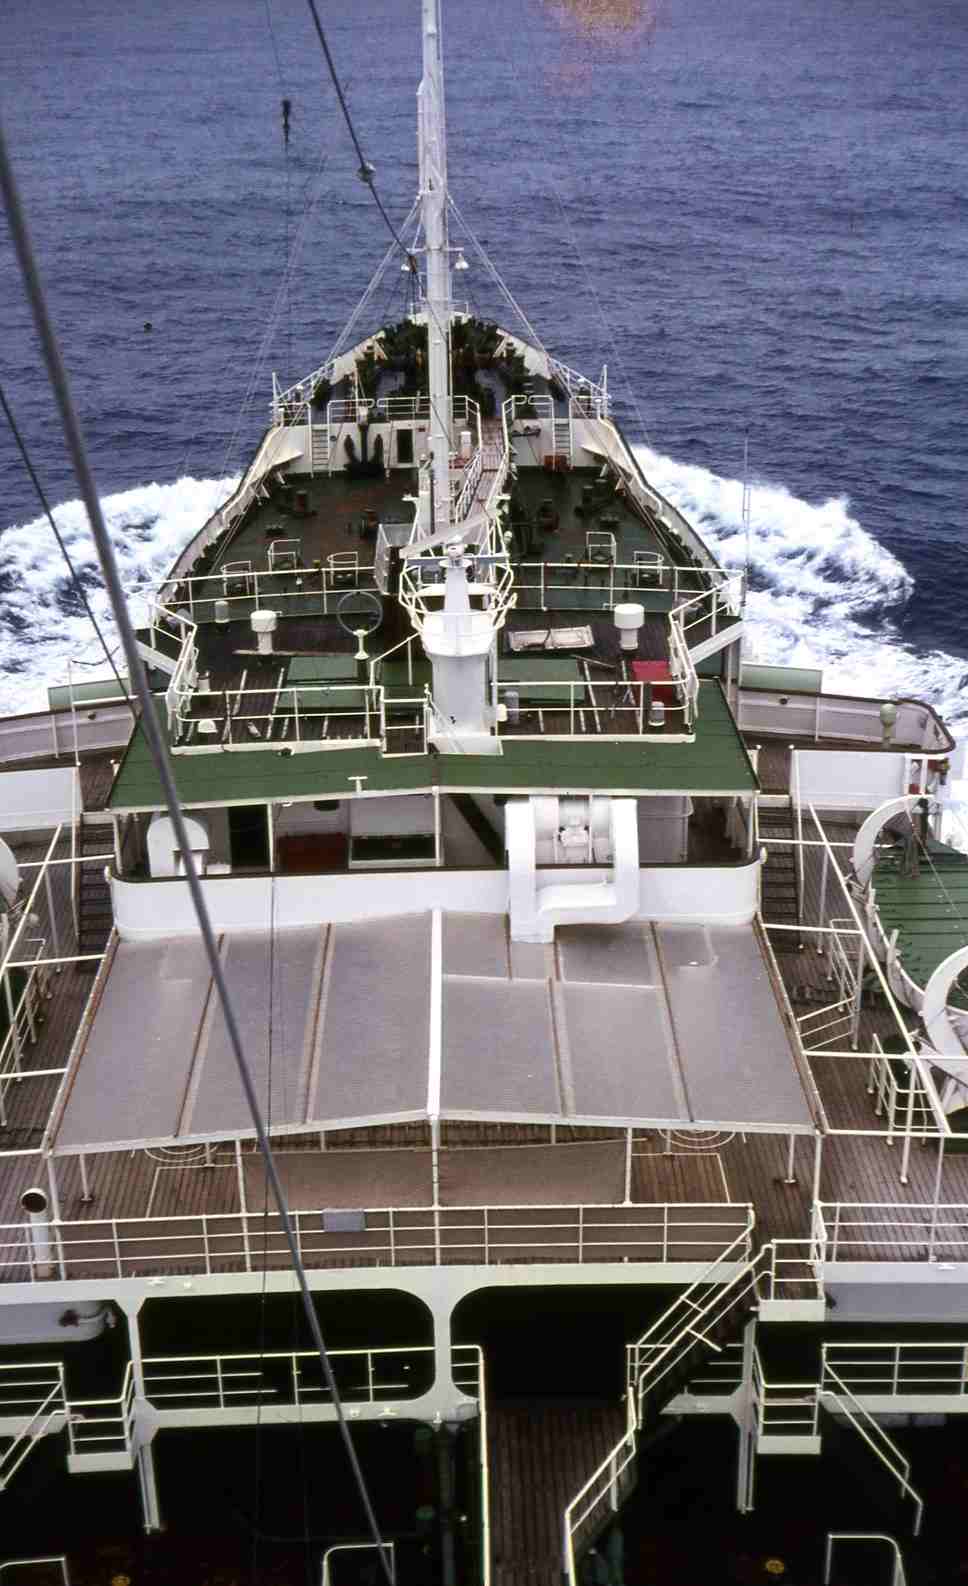 images my ideas 19/19 WTN 1967-5 Hemifusus At Sea Foredeck From Mast Top.jpg